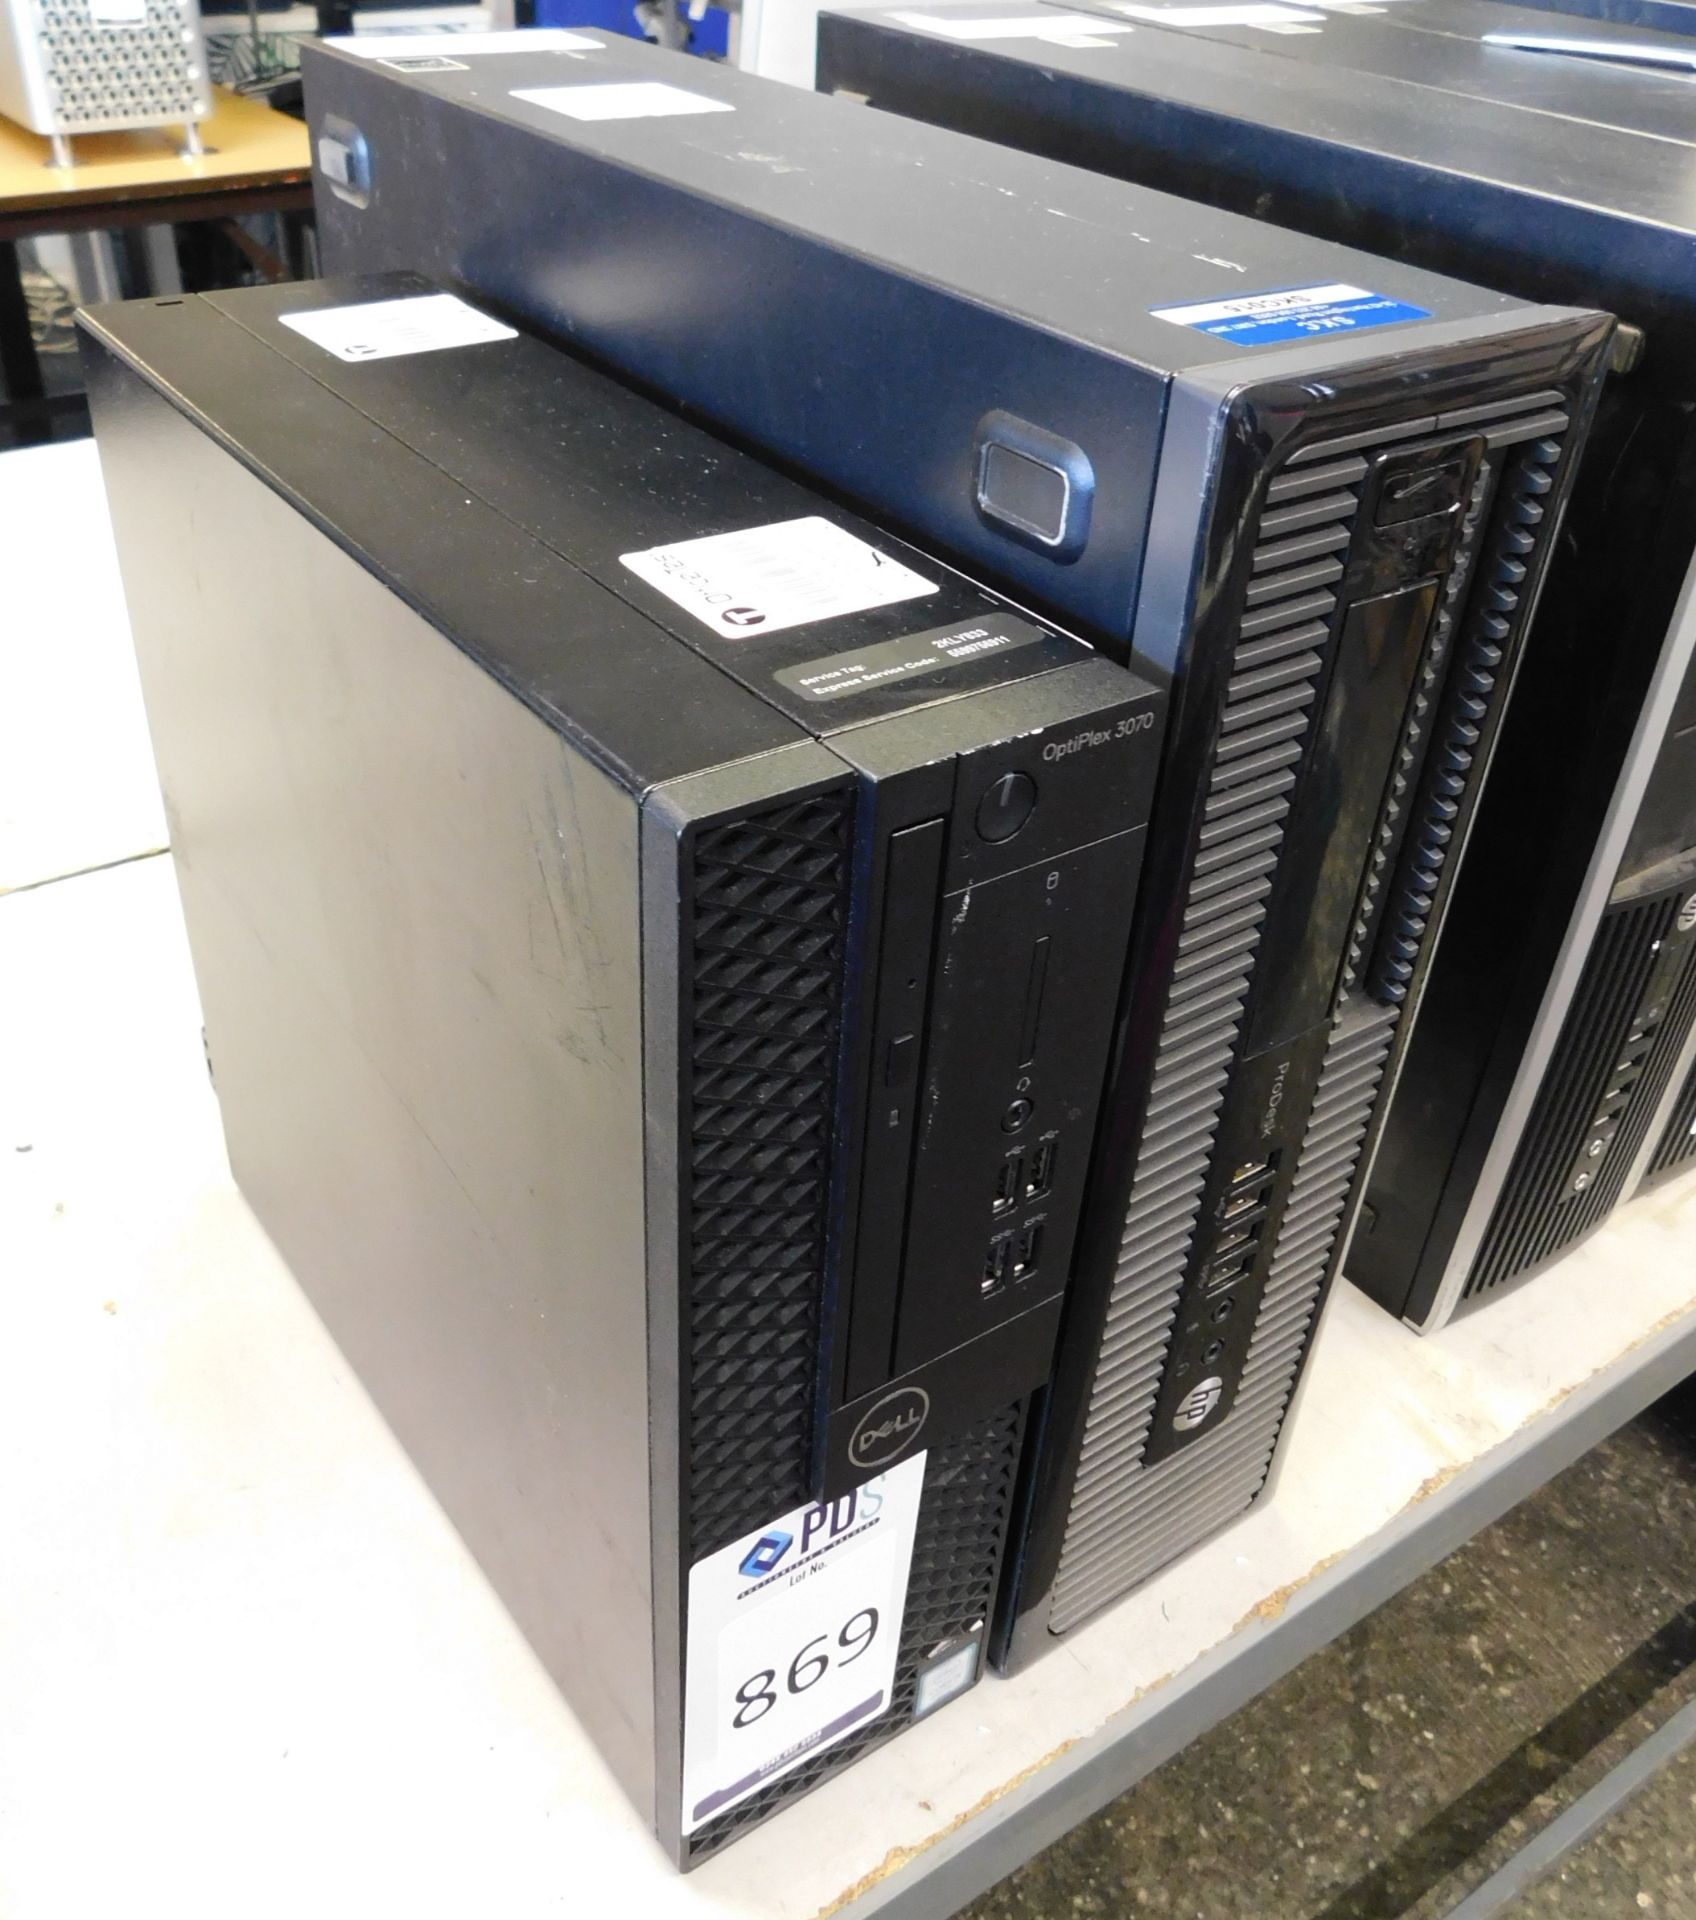 Dell Optiplex 3070 PC & HP ProDesk PC, i5 (No HDDs) (Location: Stockport. Please Refer to General